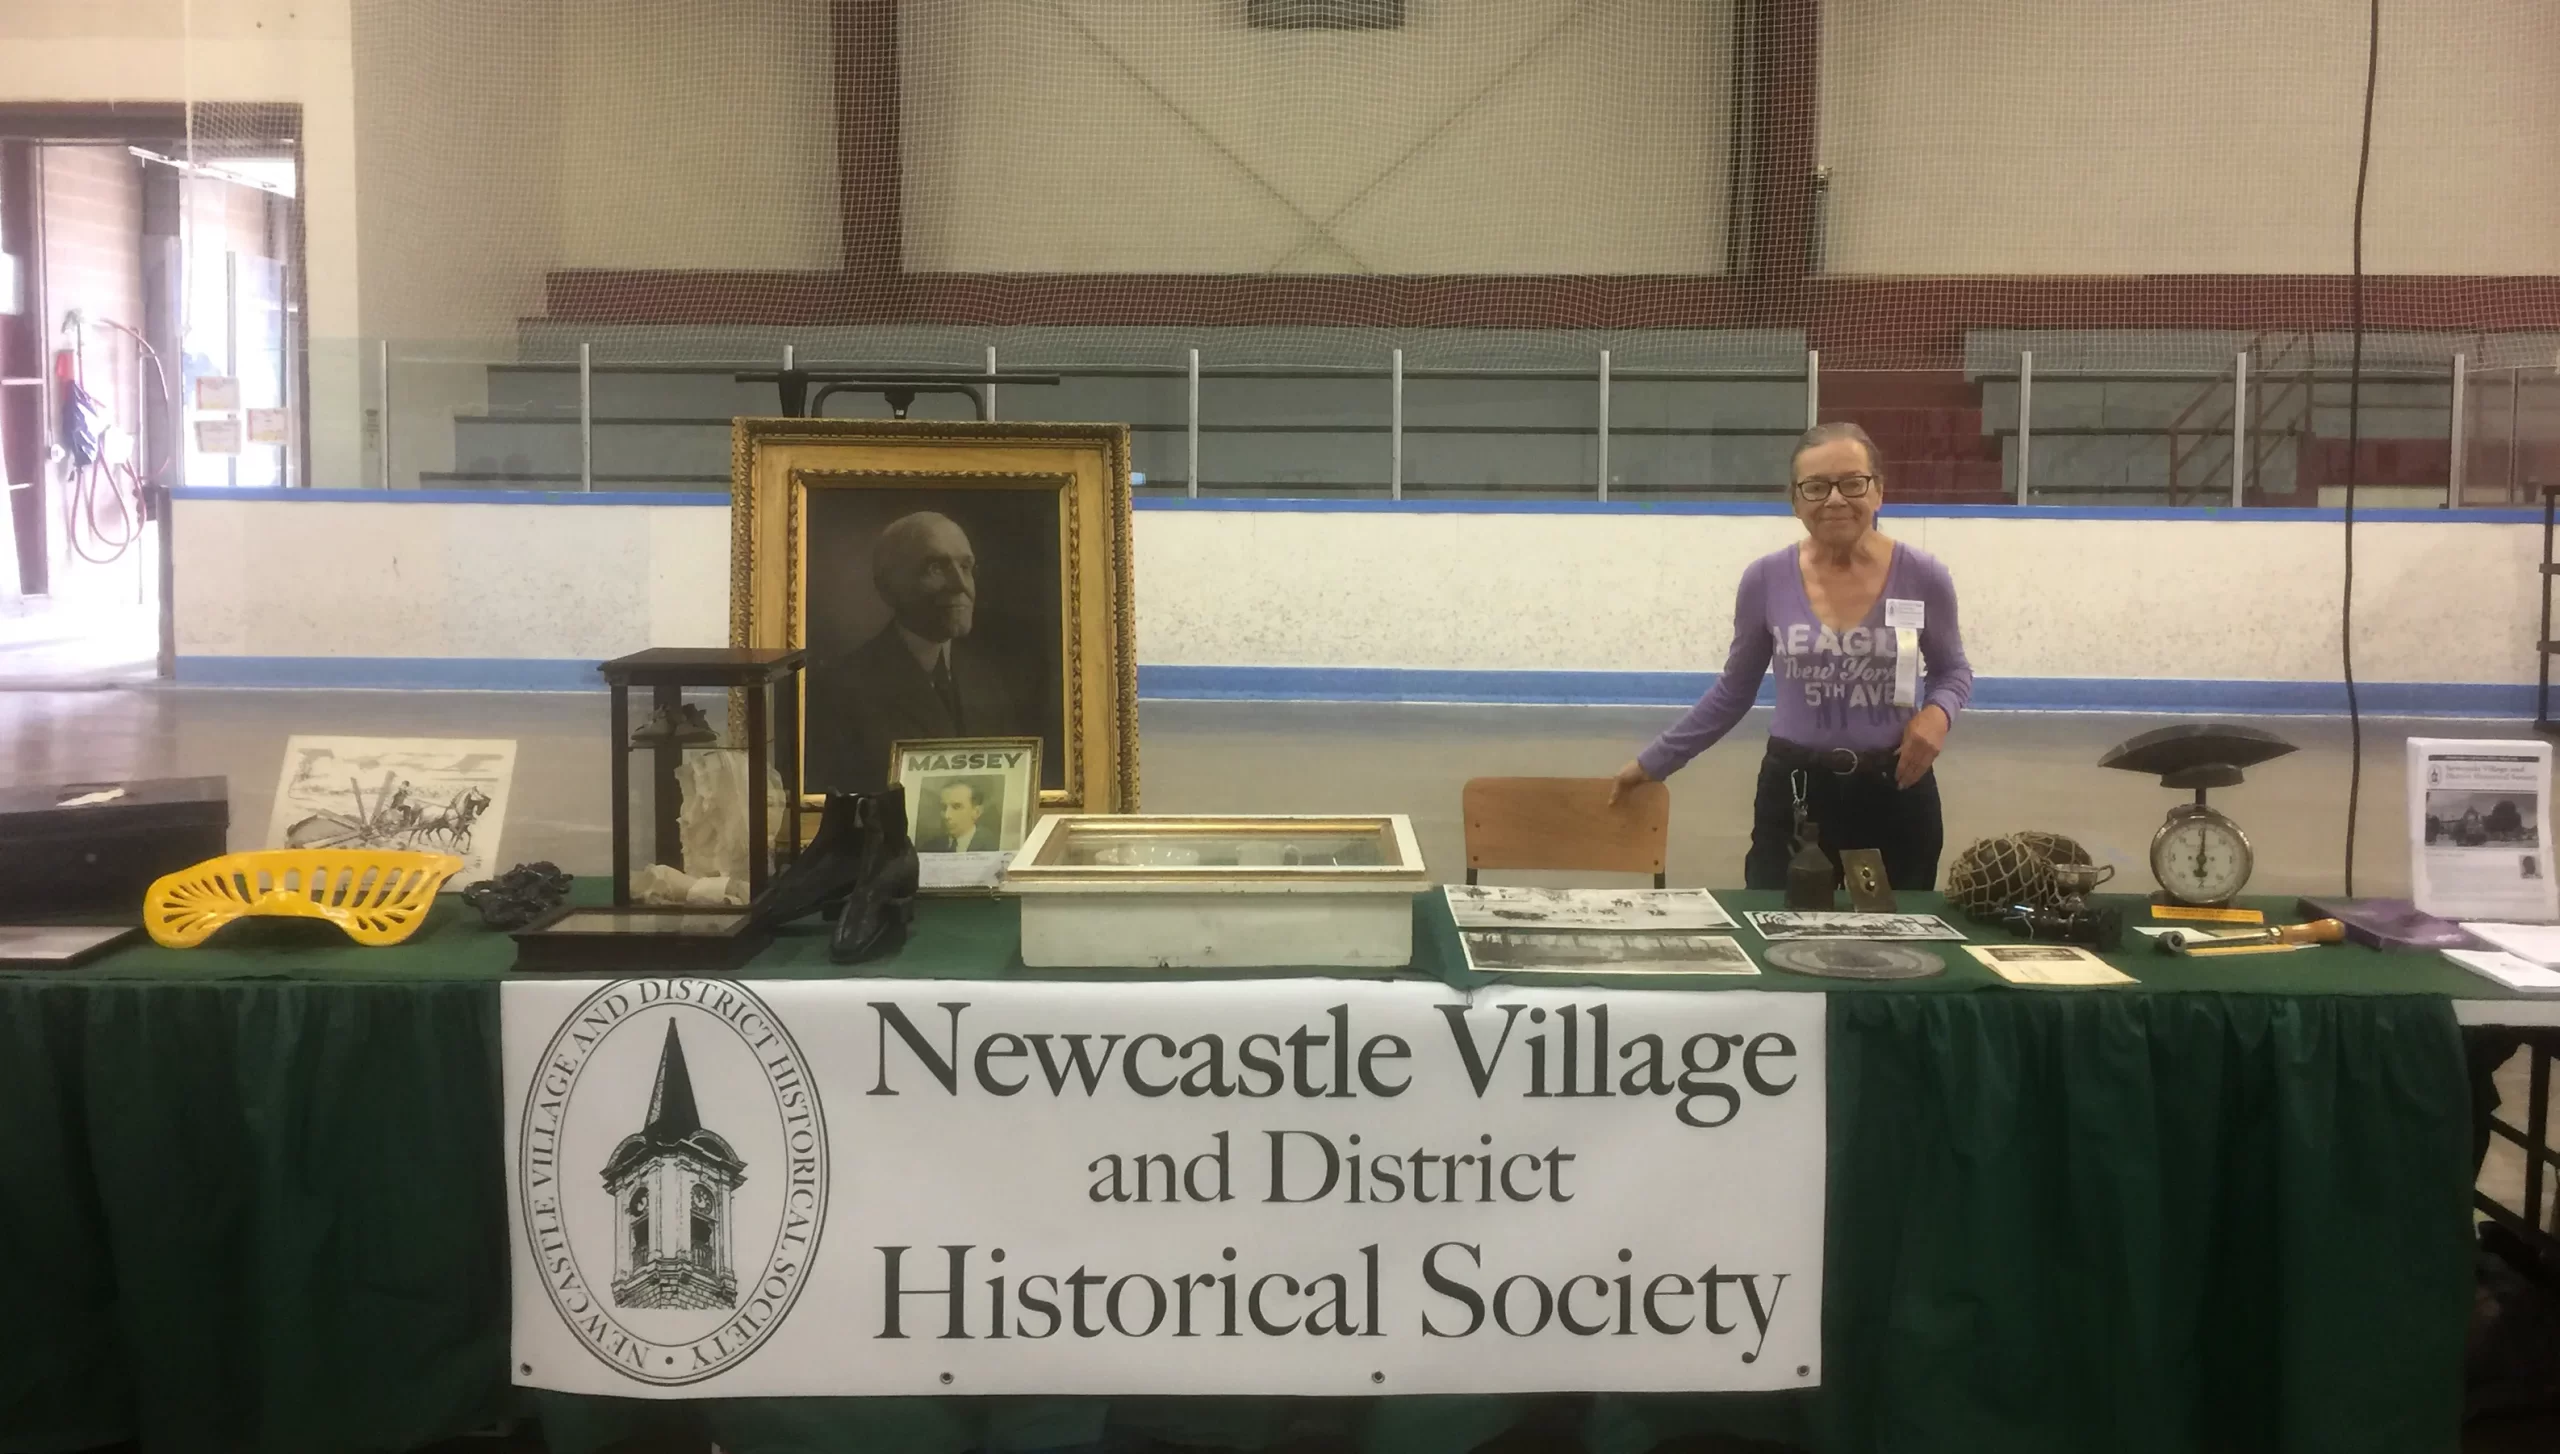 Newcastle Village and District Historical Society table displaying artifacts at Orono Fair